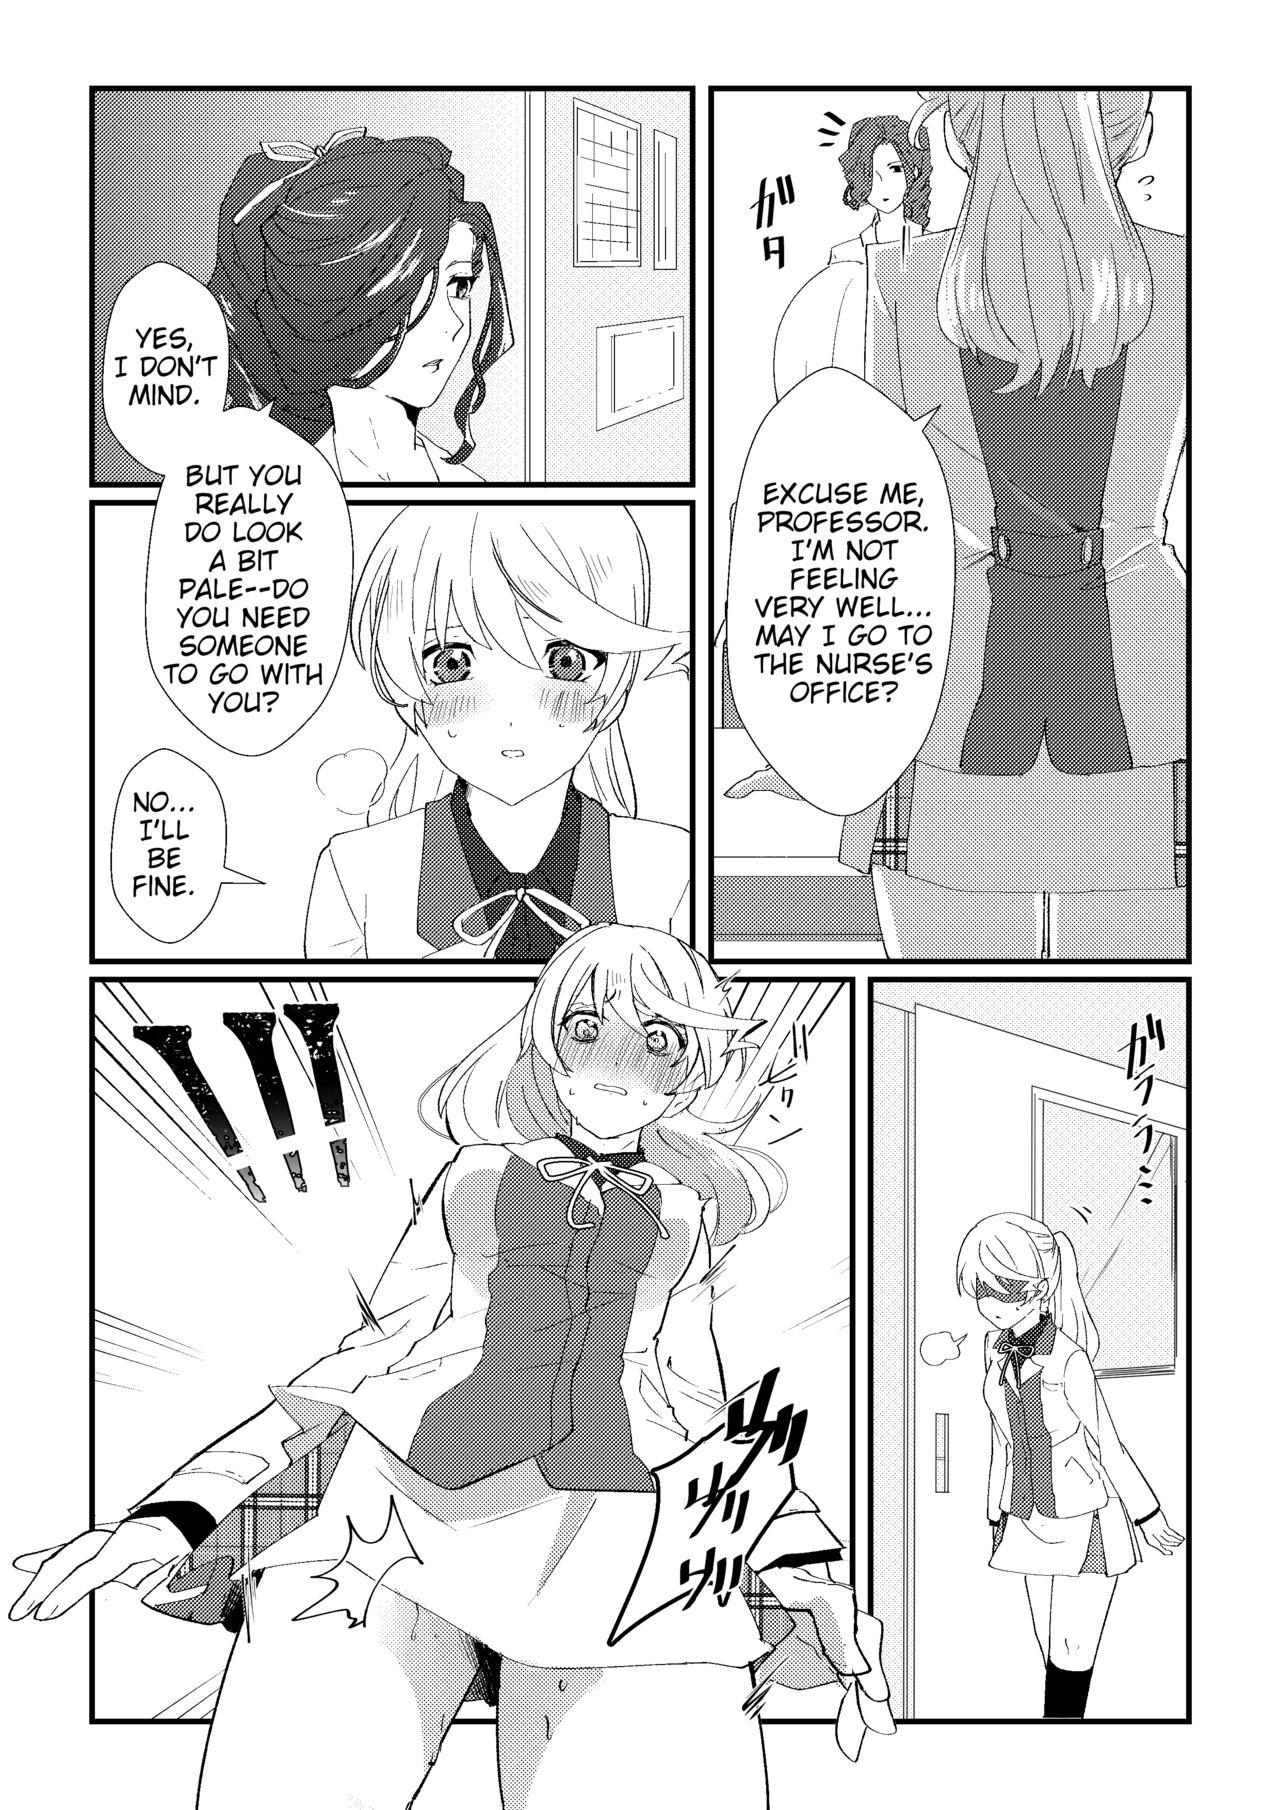 Sola crazy about you - Tales of zestiria Worship - Page 3